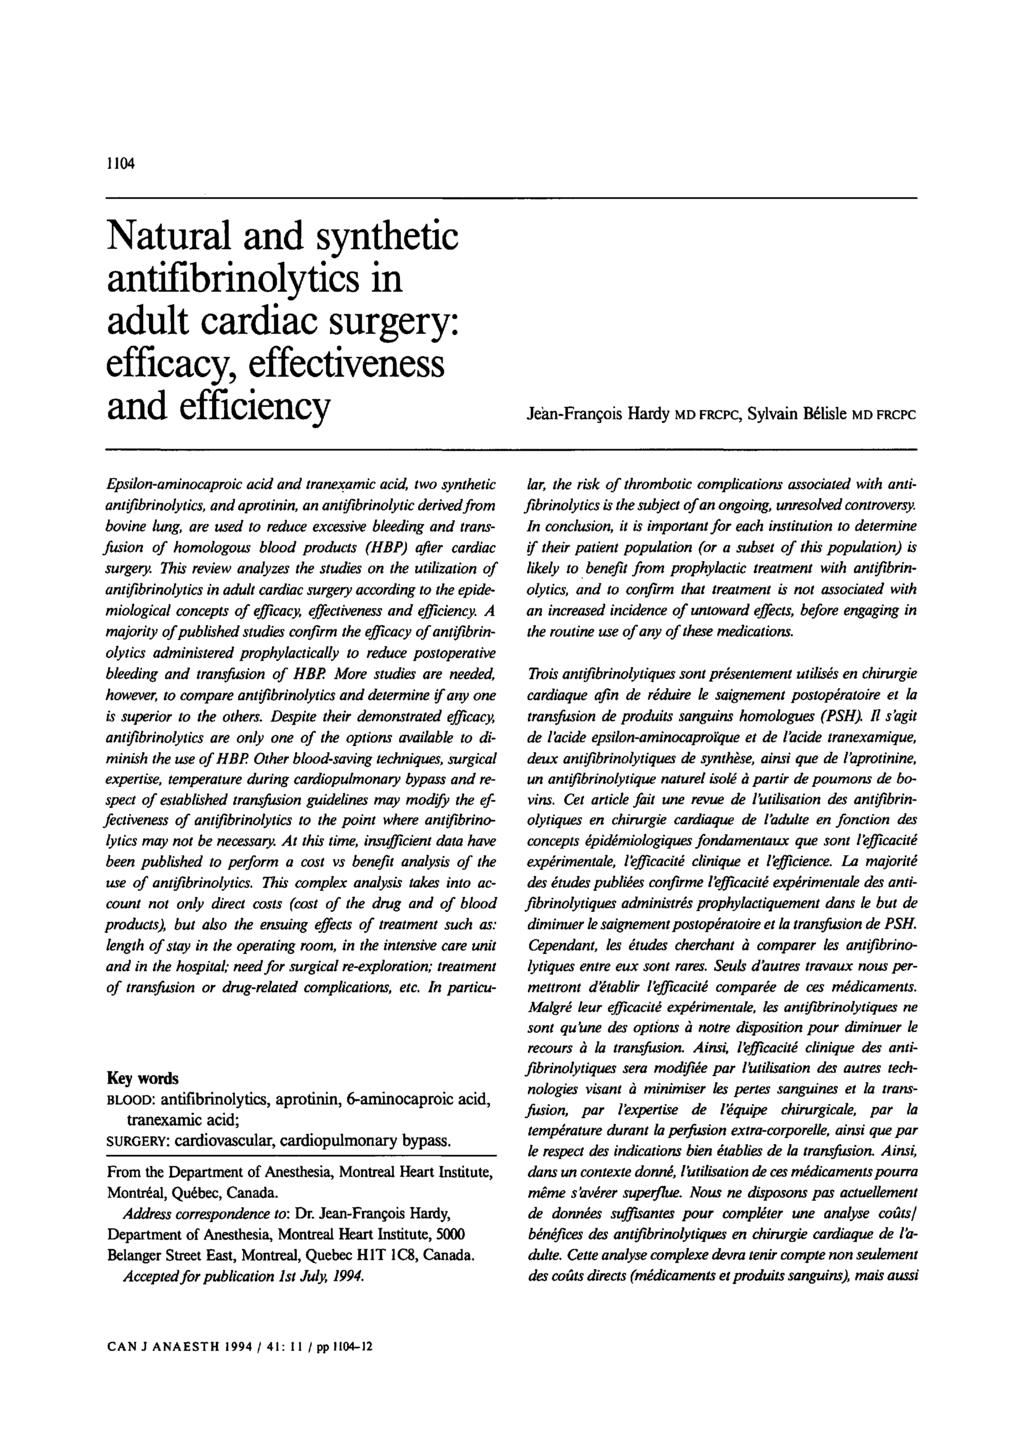 1104 Natural and synthetic antifibrinolytics in adult cardiac surgery: efficacy, effectiveness and efficienc,y Jehn-Fran~ois Hardy MD FRCPC, Sylvain B61isle MD FRCPC Epsilon-aminocaproic acid and